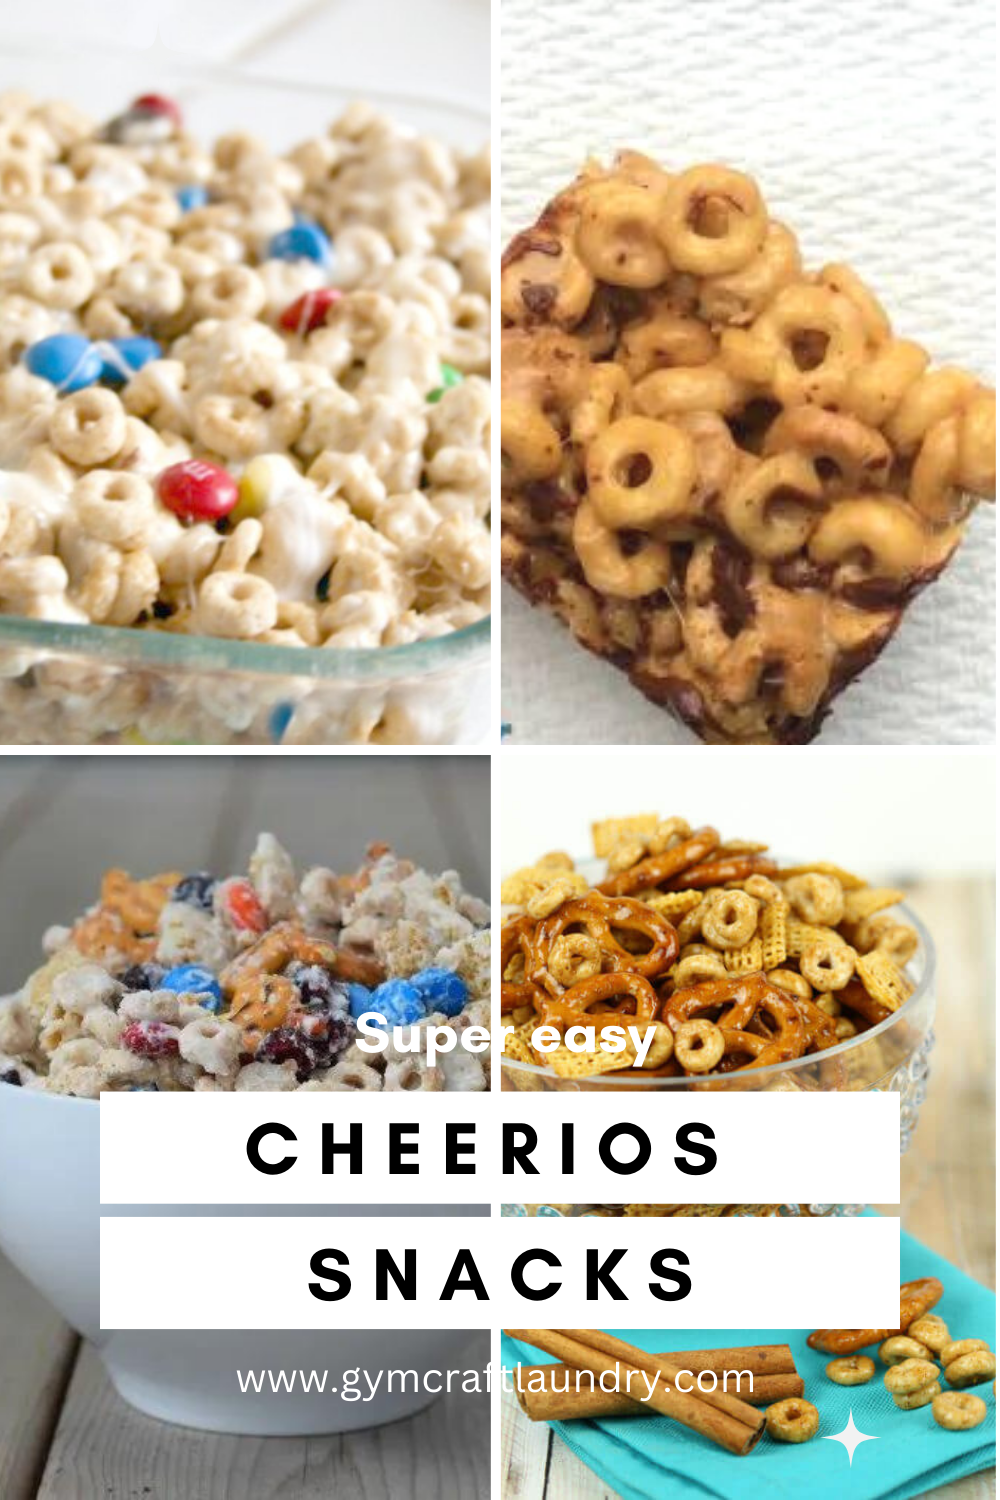 A collection of snacks and treats made with cheerios